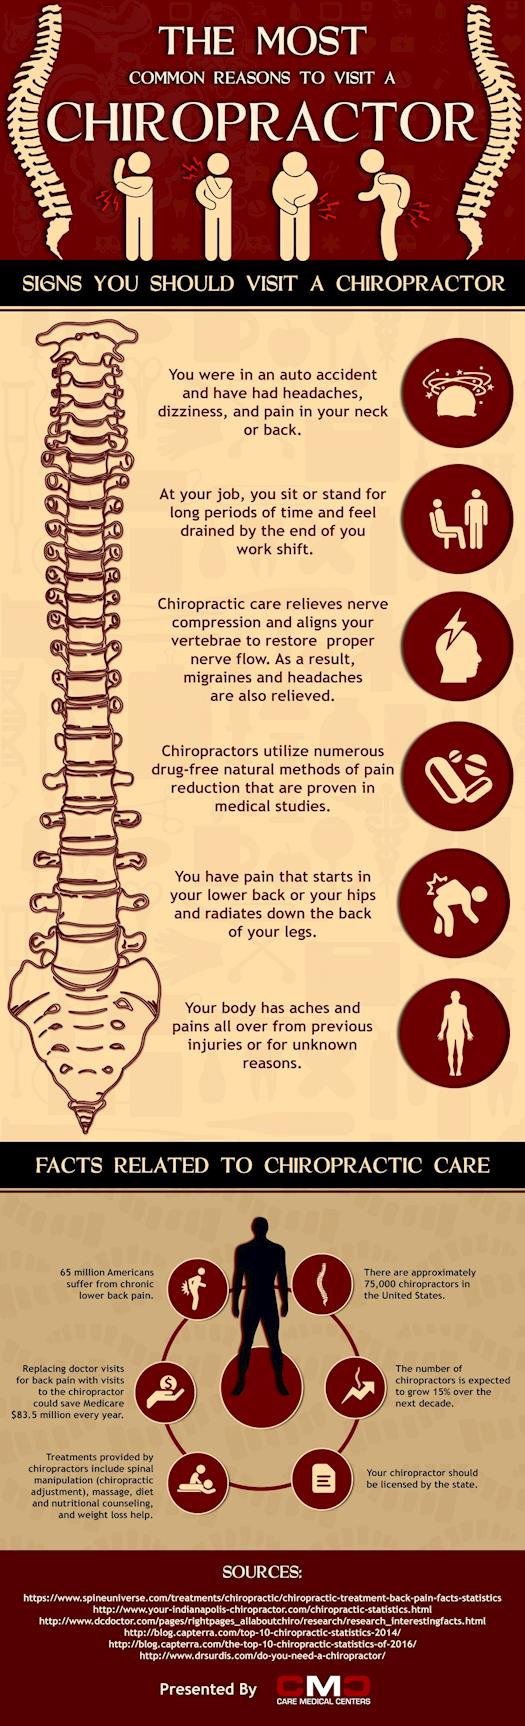 Signs that You Need to Visit a Chiropractor